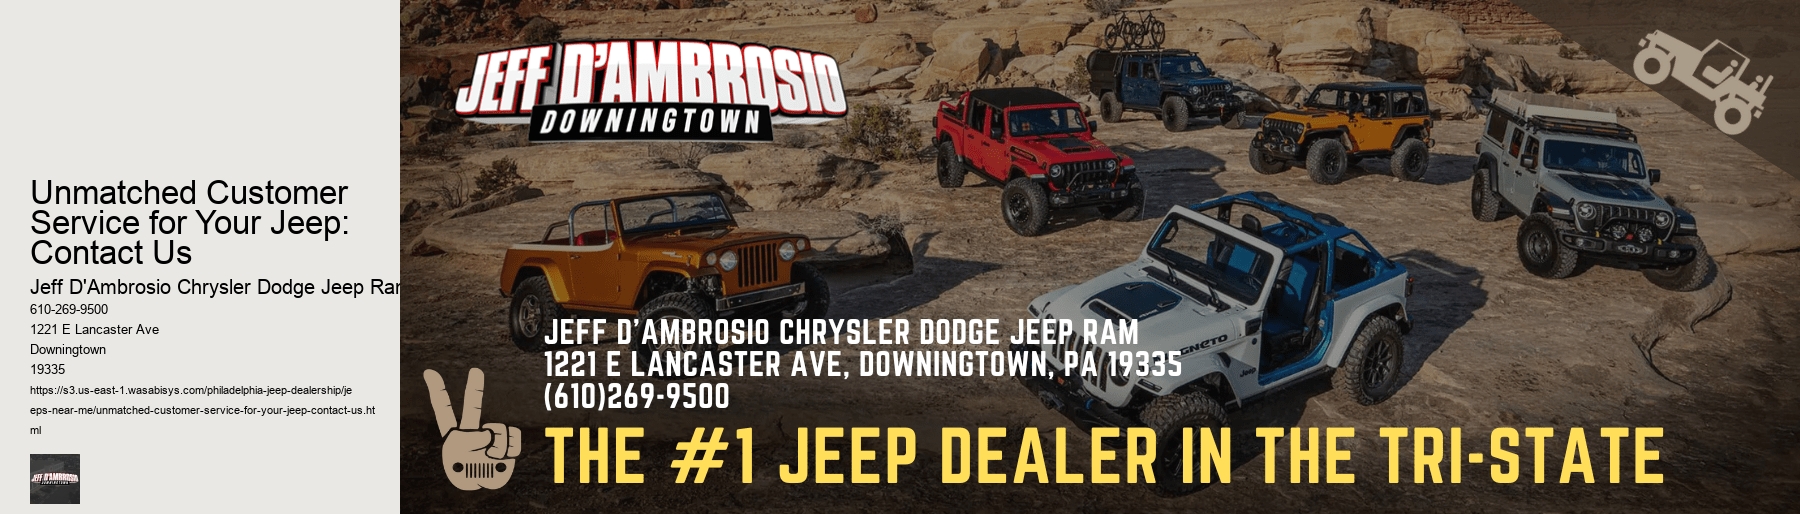 Unmatched Customer Service for Your Jeep: Contact Us